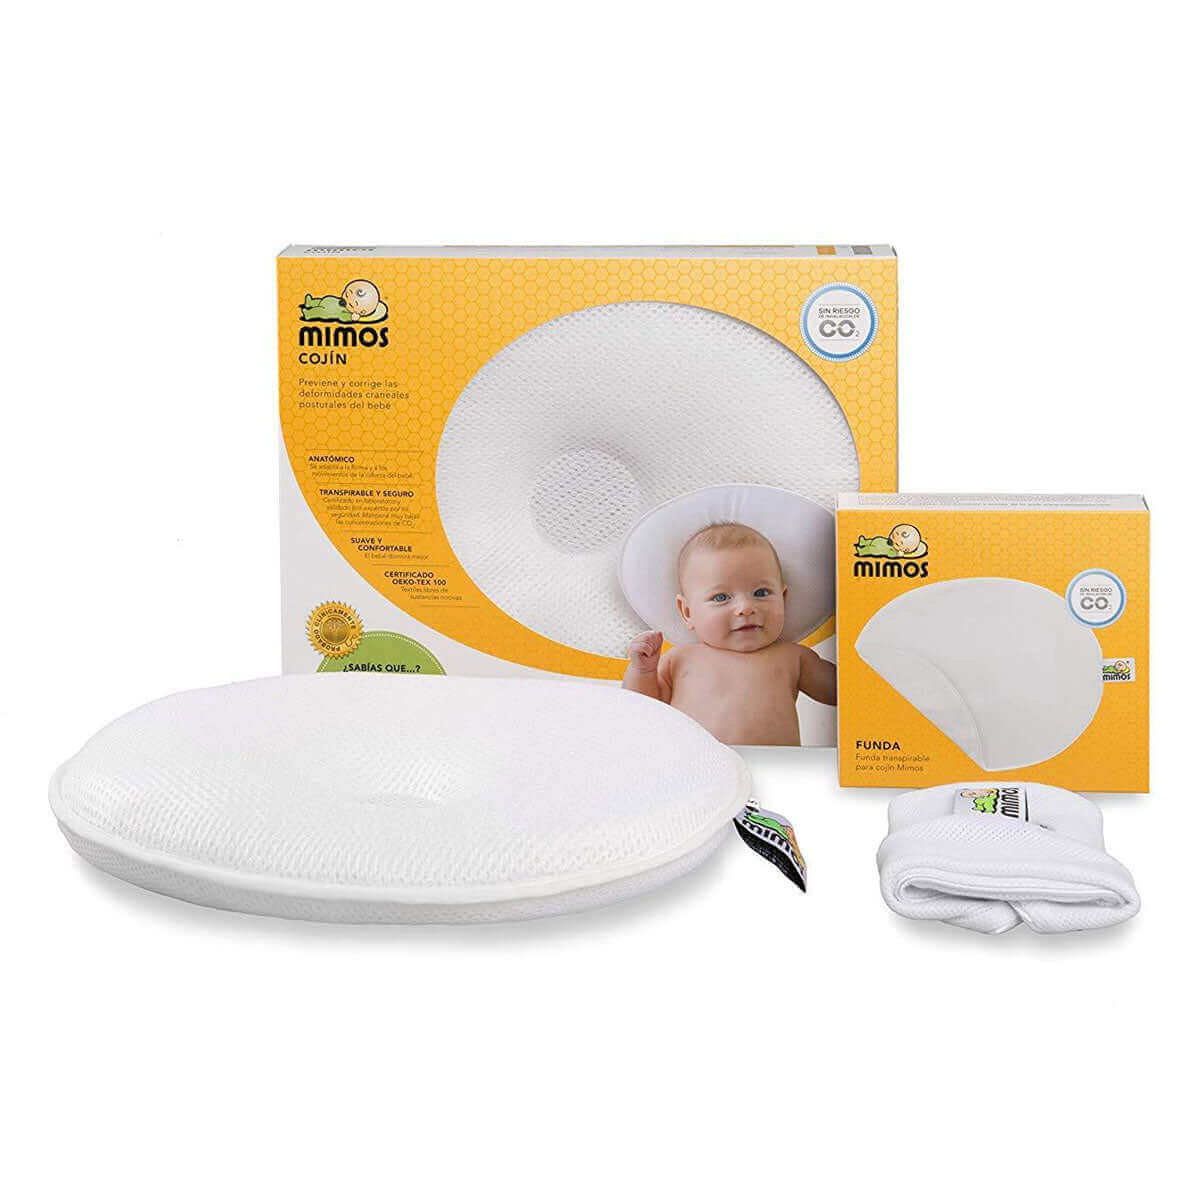 ADJUSTABLE LATERAL POSITIONING CUSHION – Baby Skull